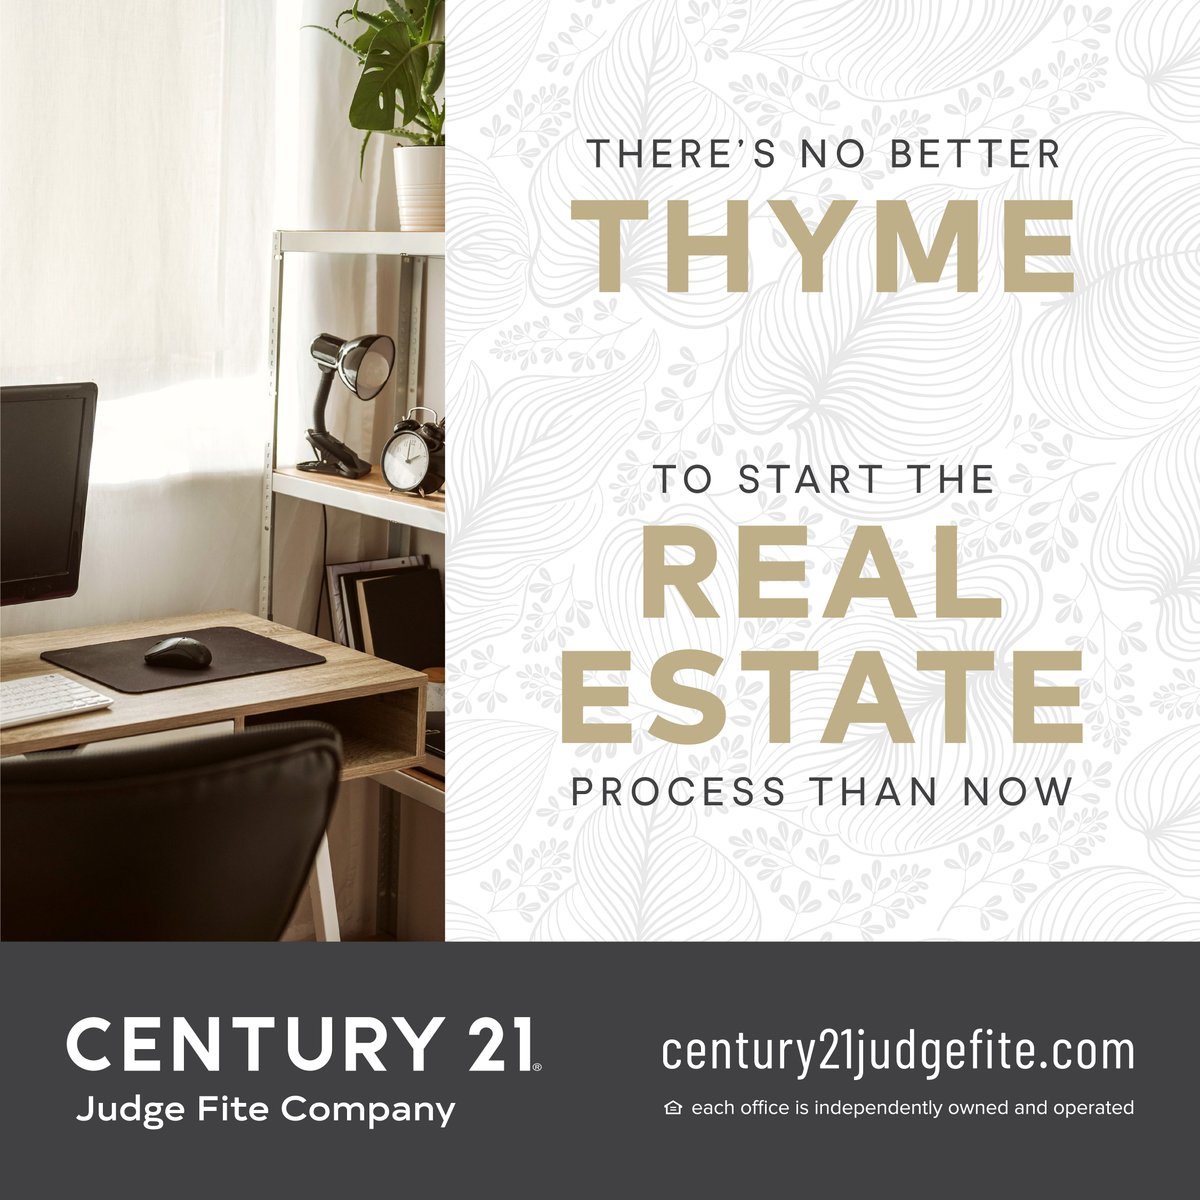 Spring fever isn't just for flowers – it's for #realestate too. When it comes to preparing to buy or sell, right now is the ideal time to get the process started and find #whereyoufeelathome this season. 🏡🌷🔑
 
Find a #REALTOR >> century21judgefite.com/directory/agent